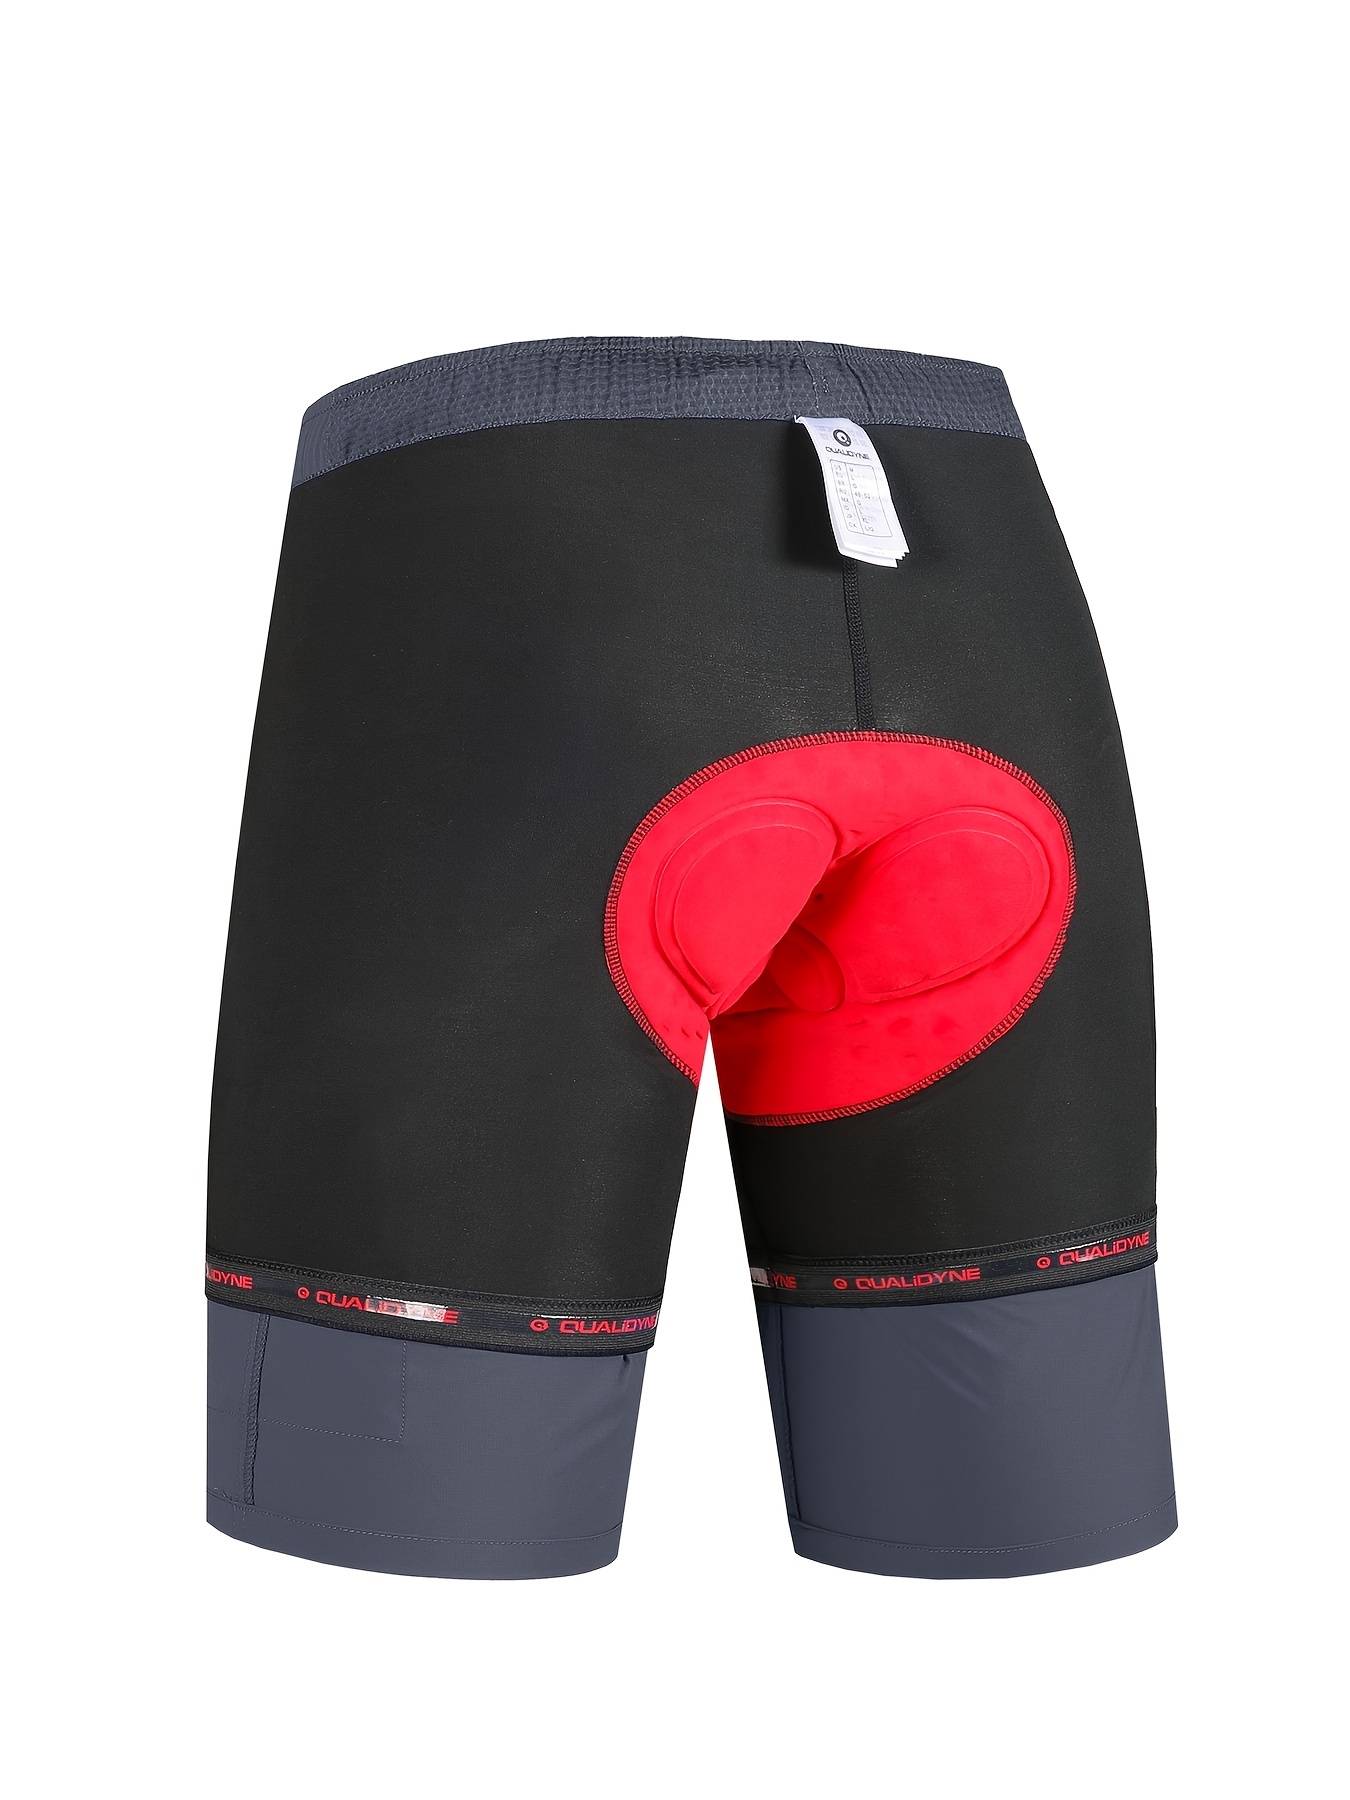 Men's Cycling Shorts Bike Underwear 4D Padded Shorts, Bicycle MTB Liner  Mountain Shorts for Cycle Riding Biker